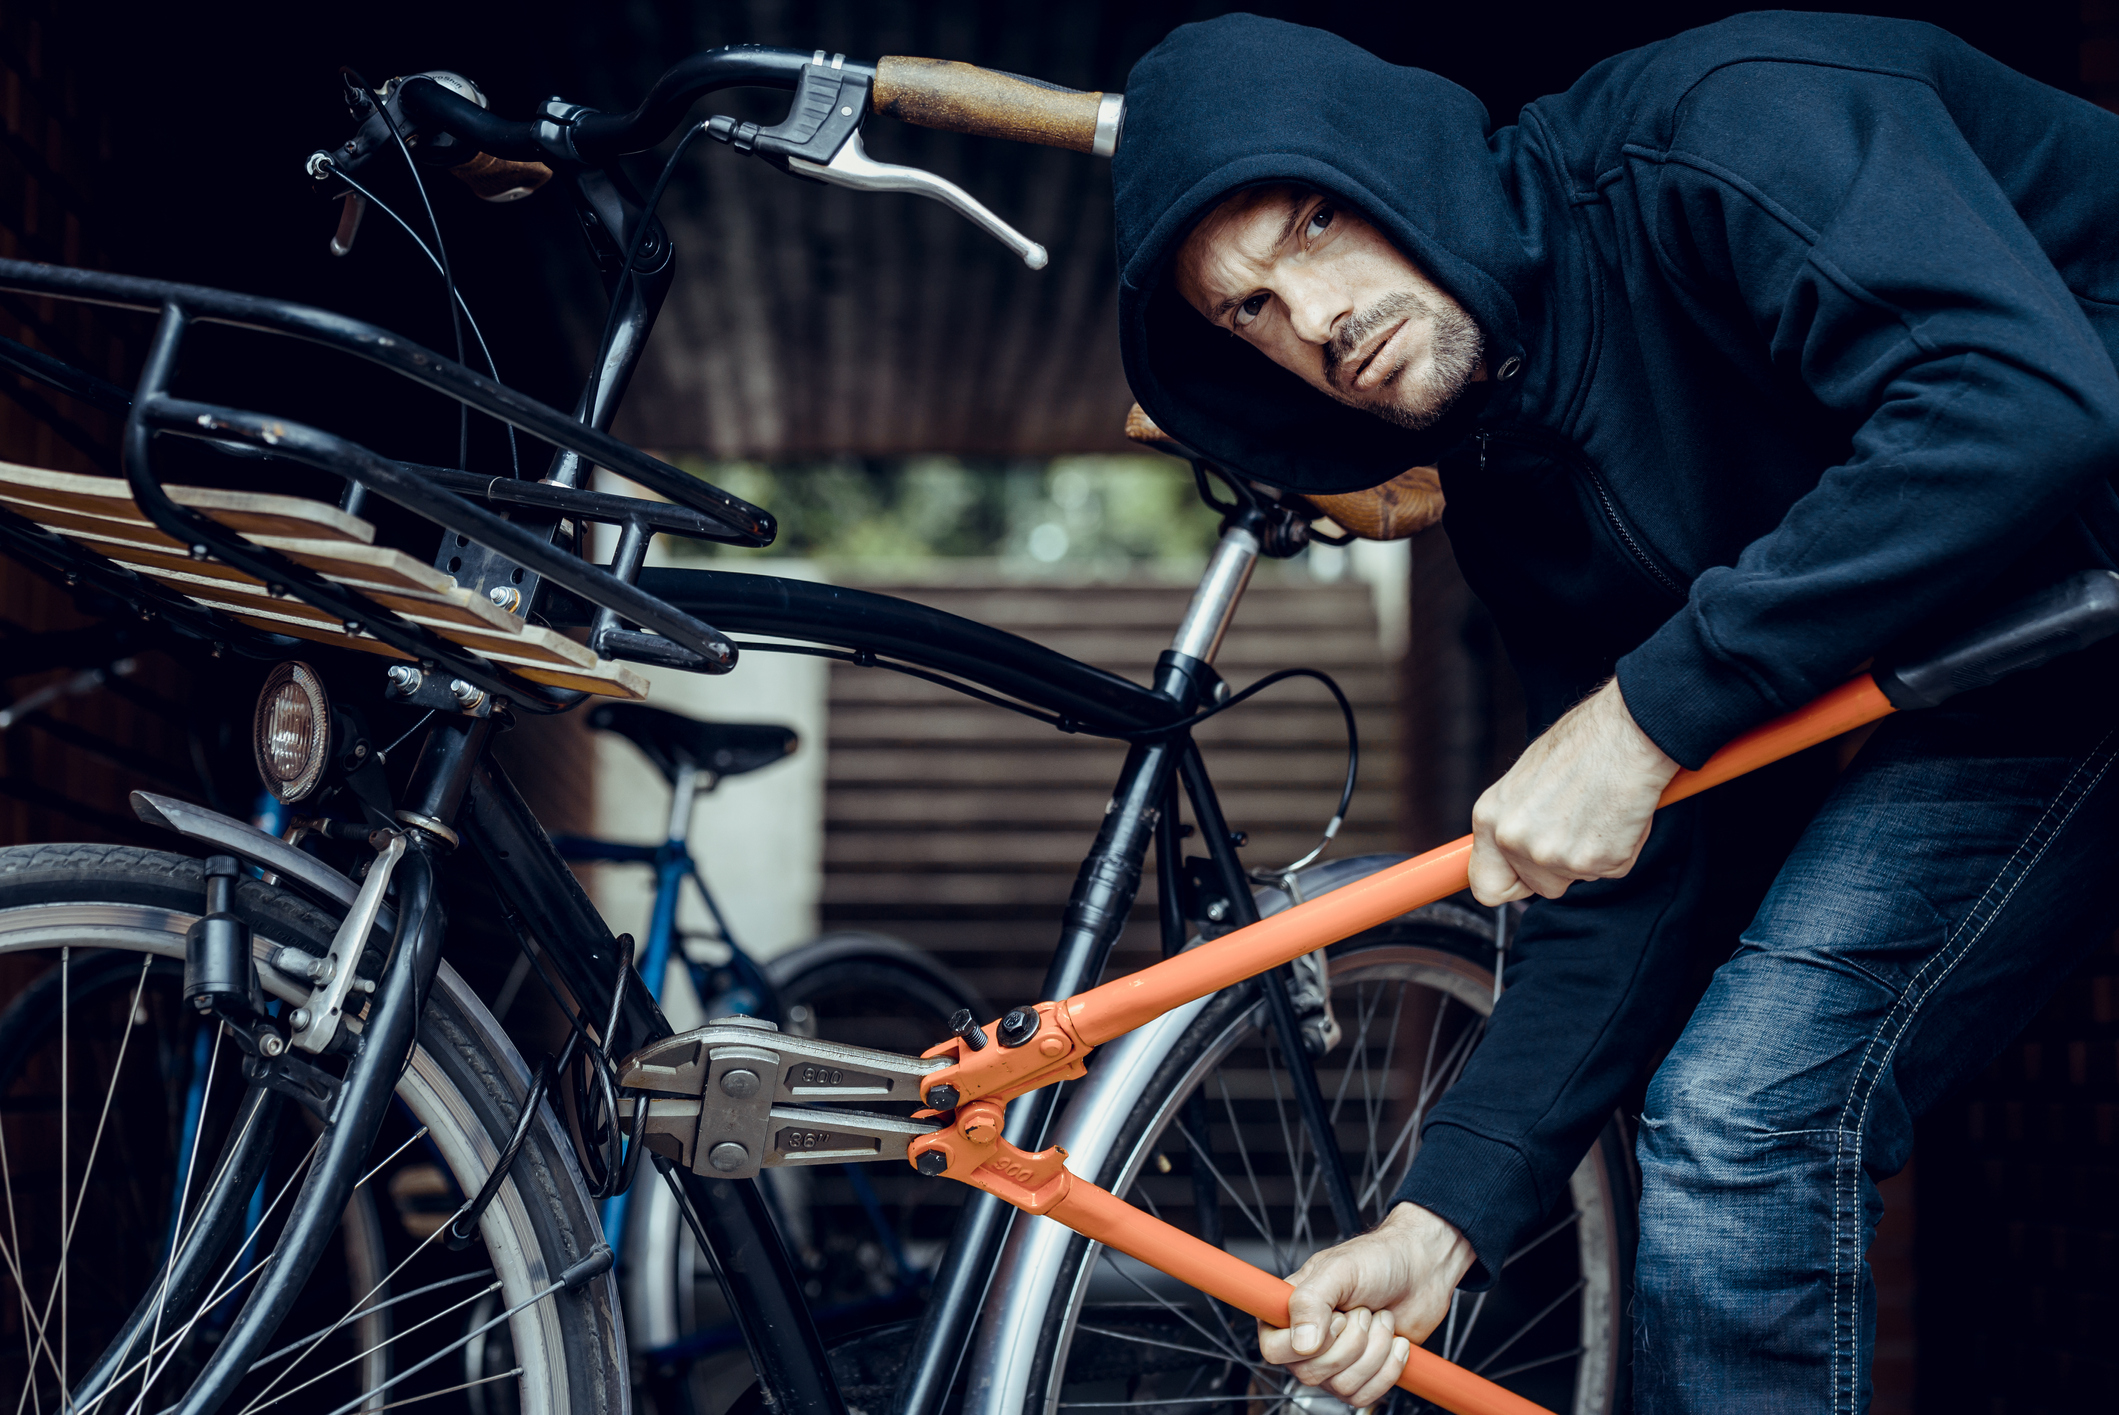 Thief stealing a bicycle